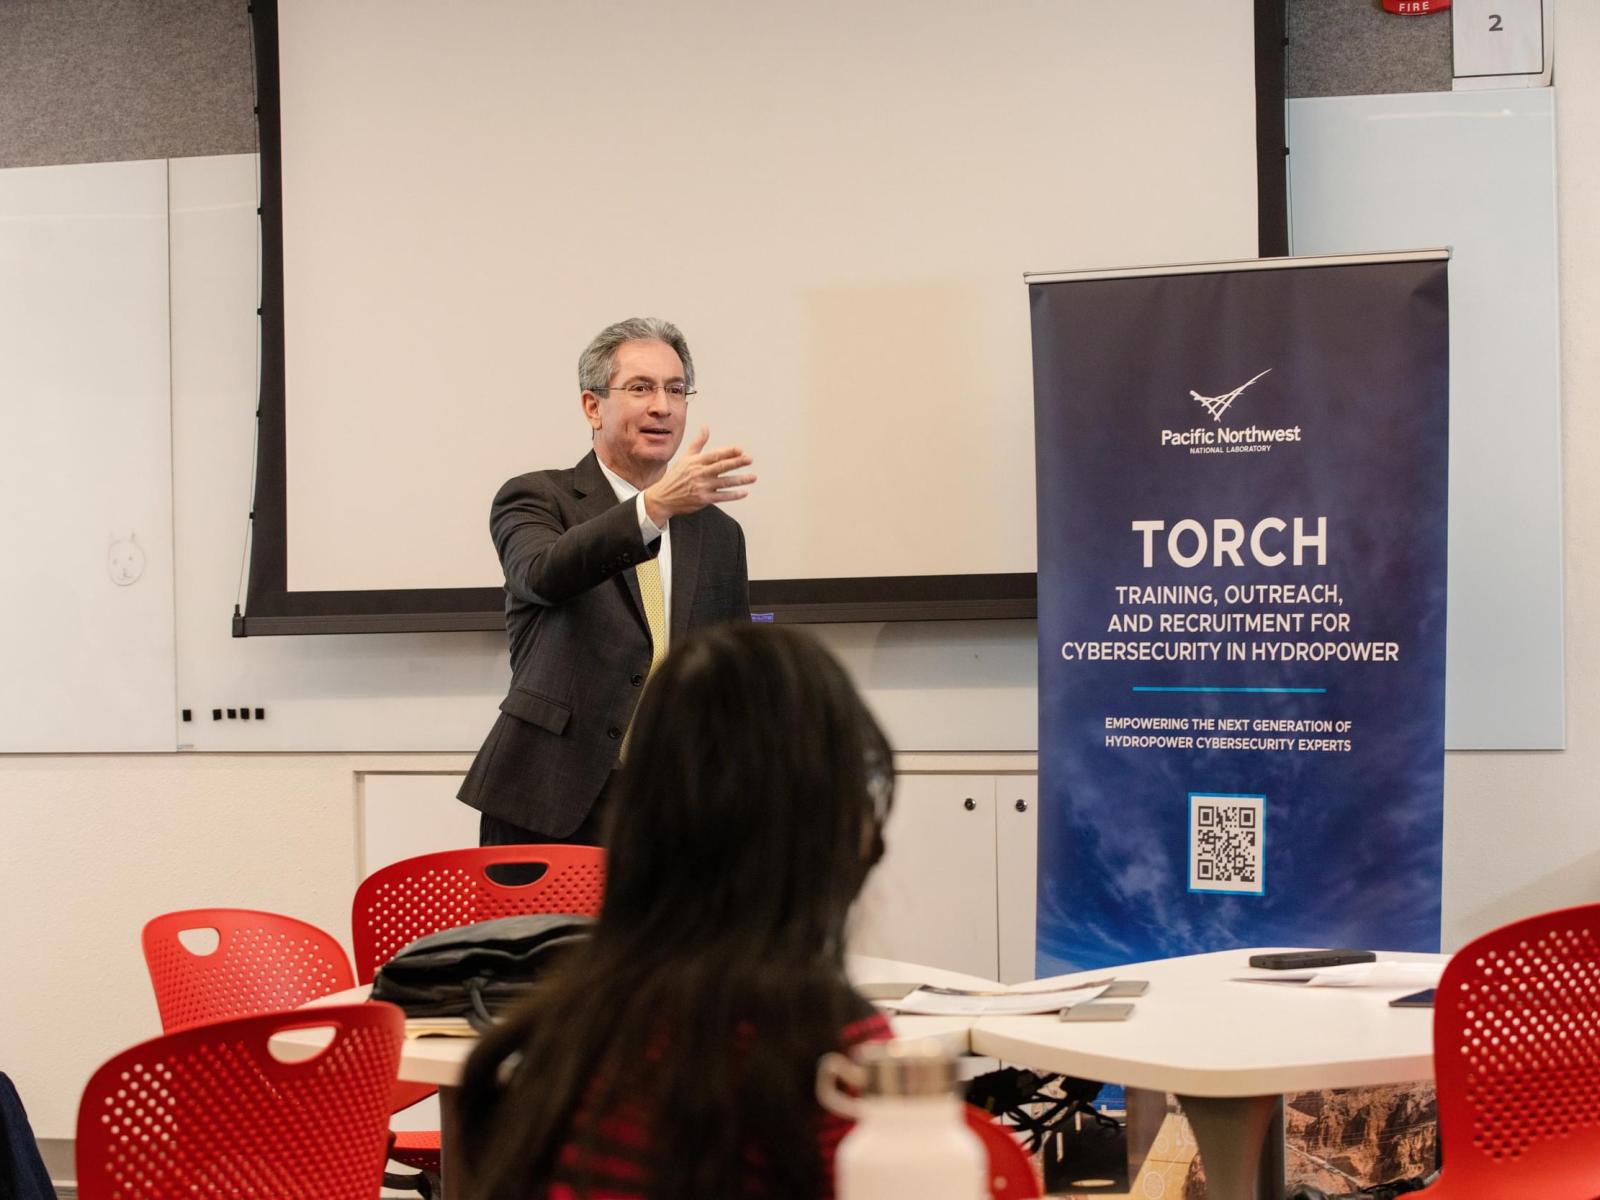 Steve Ashby presents at the launch of TORCH at UTEP